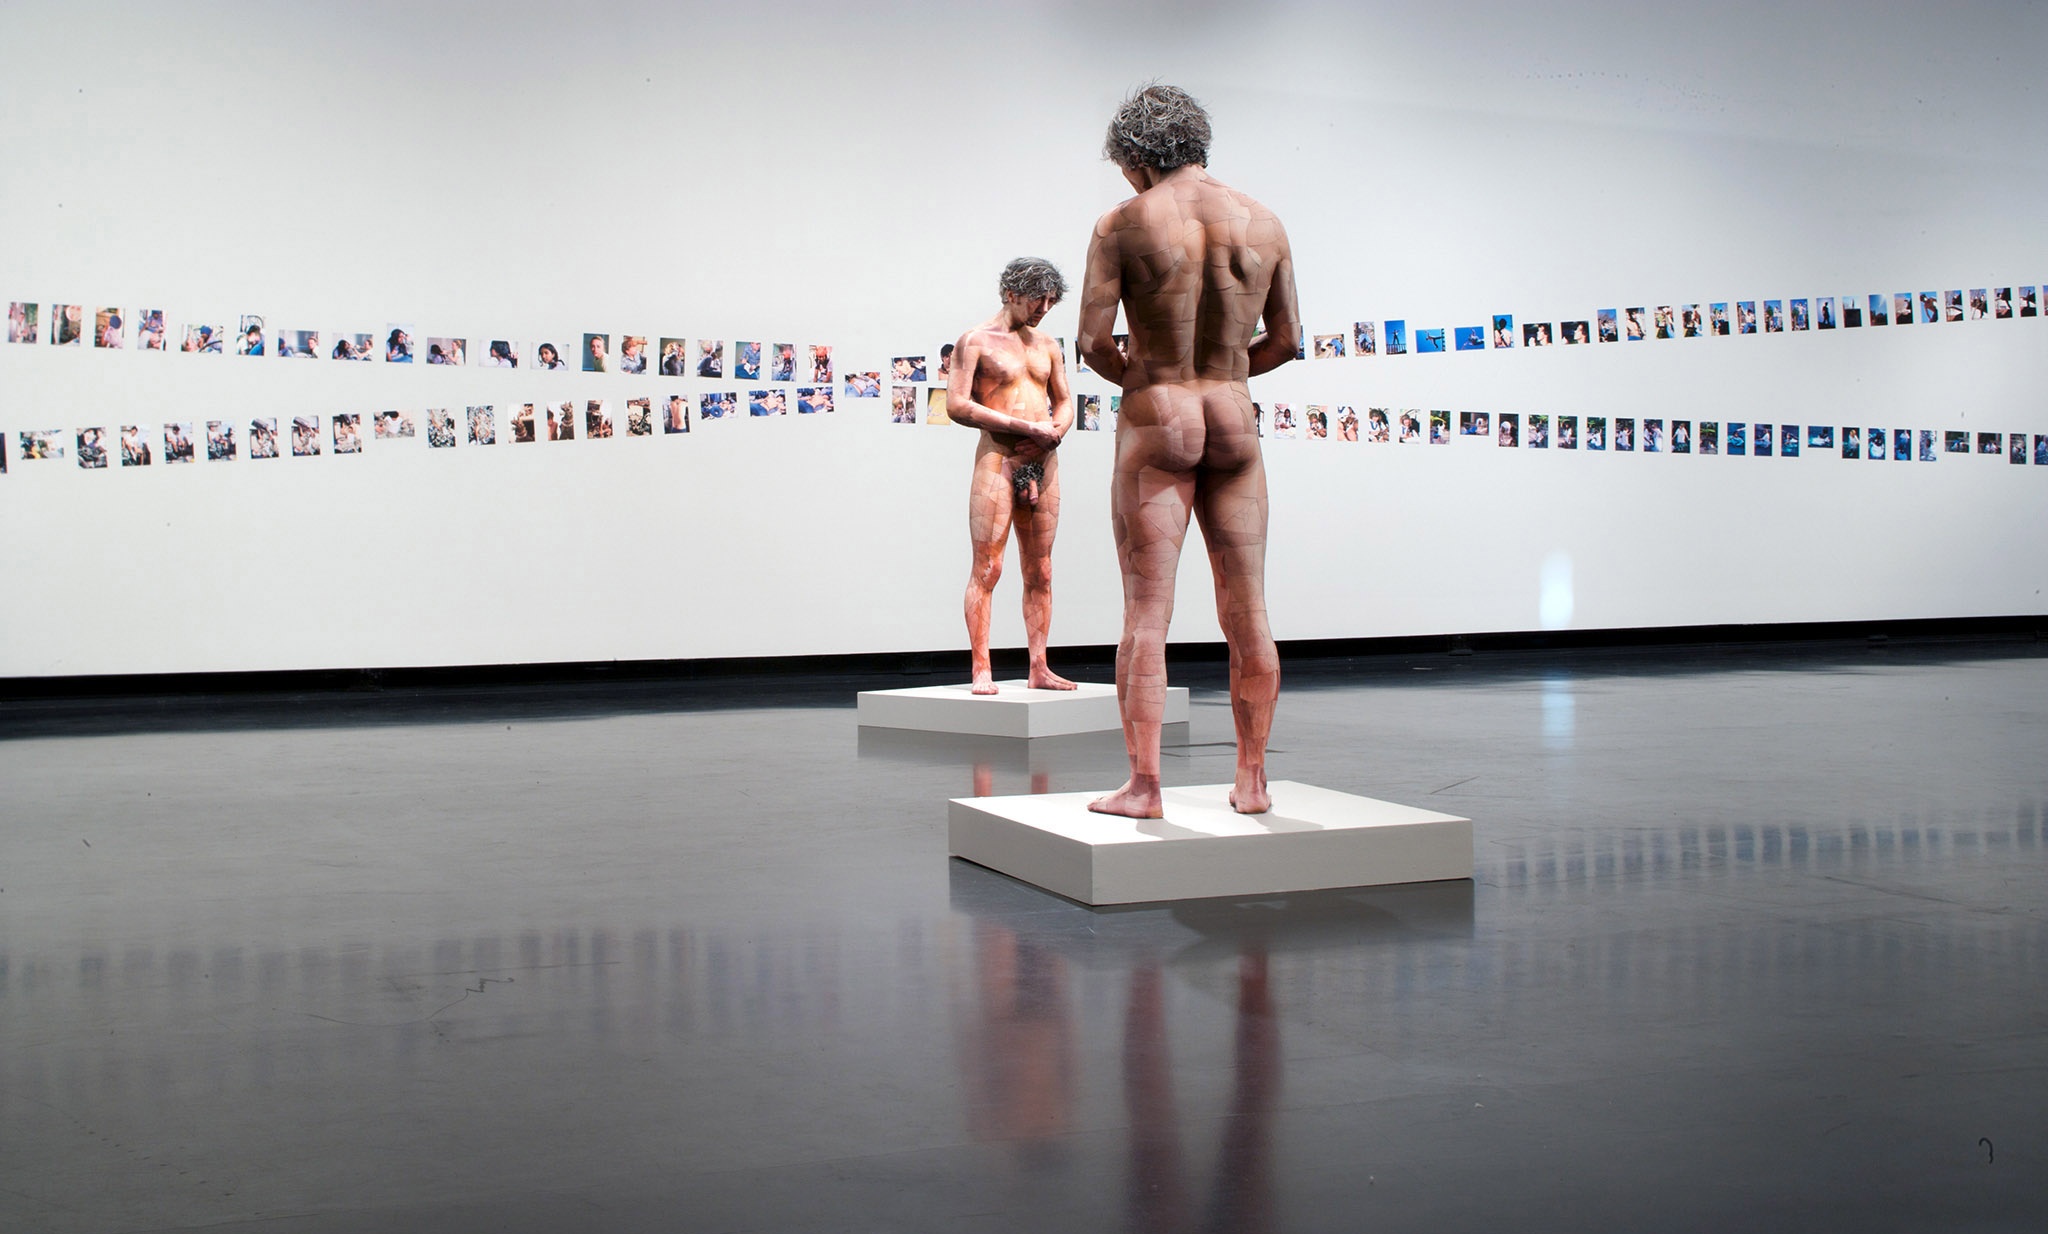 Two life-sized, nude models made of flesh-colored photographs of a white man face each other in front of a white wall with two rows of photographs.